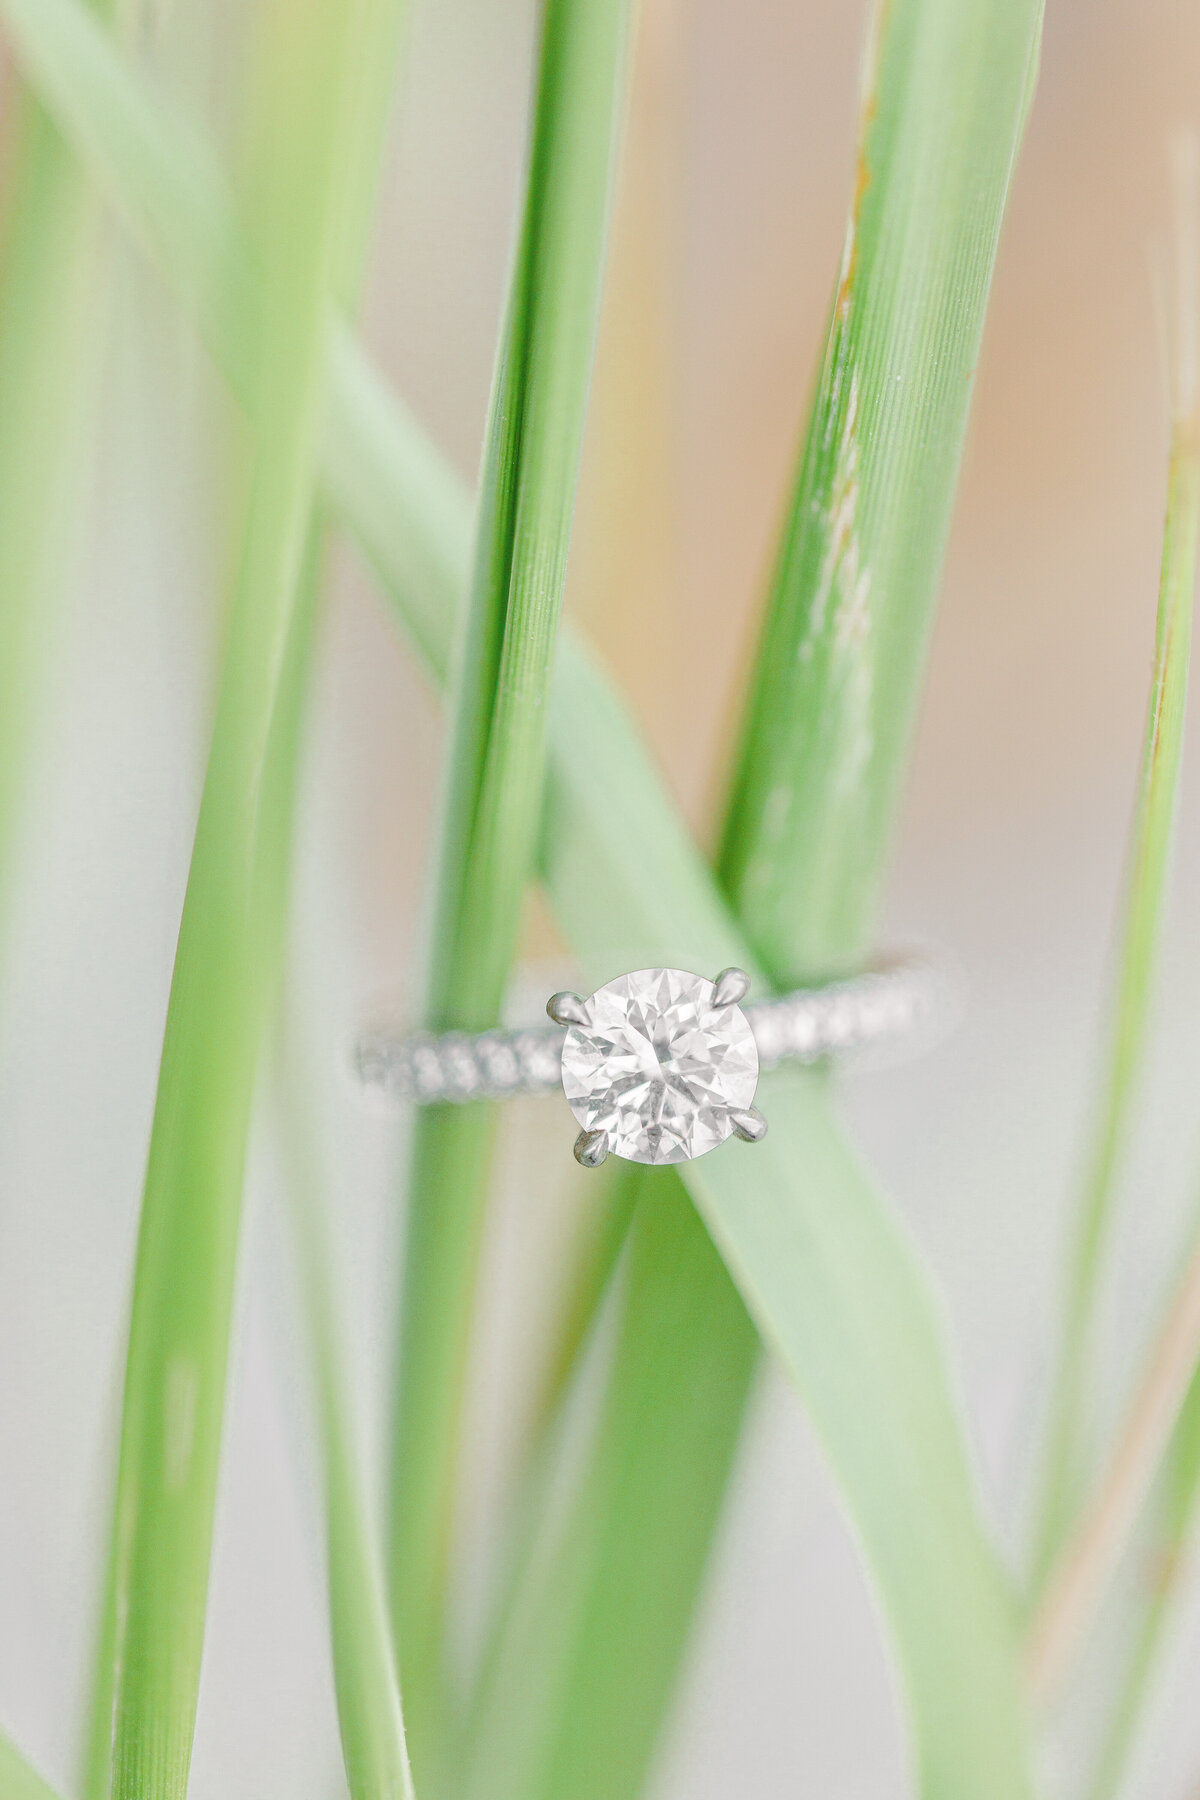 Engagement ring on beach grass representing MA beach engagement photography